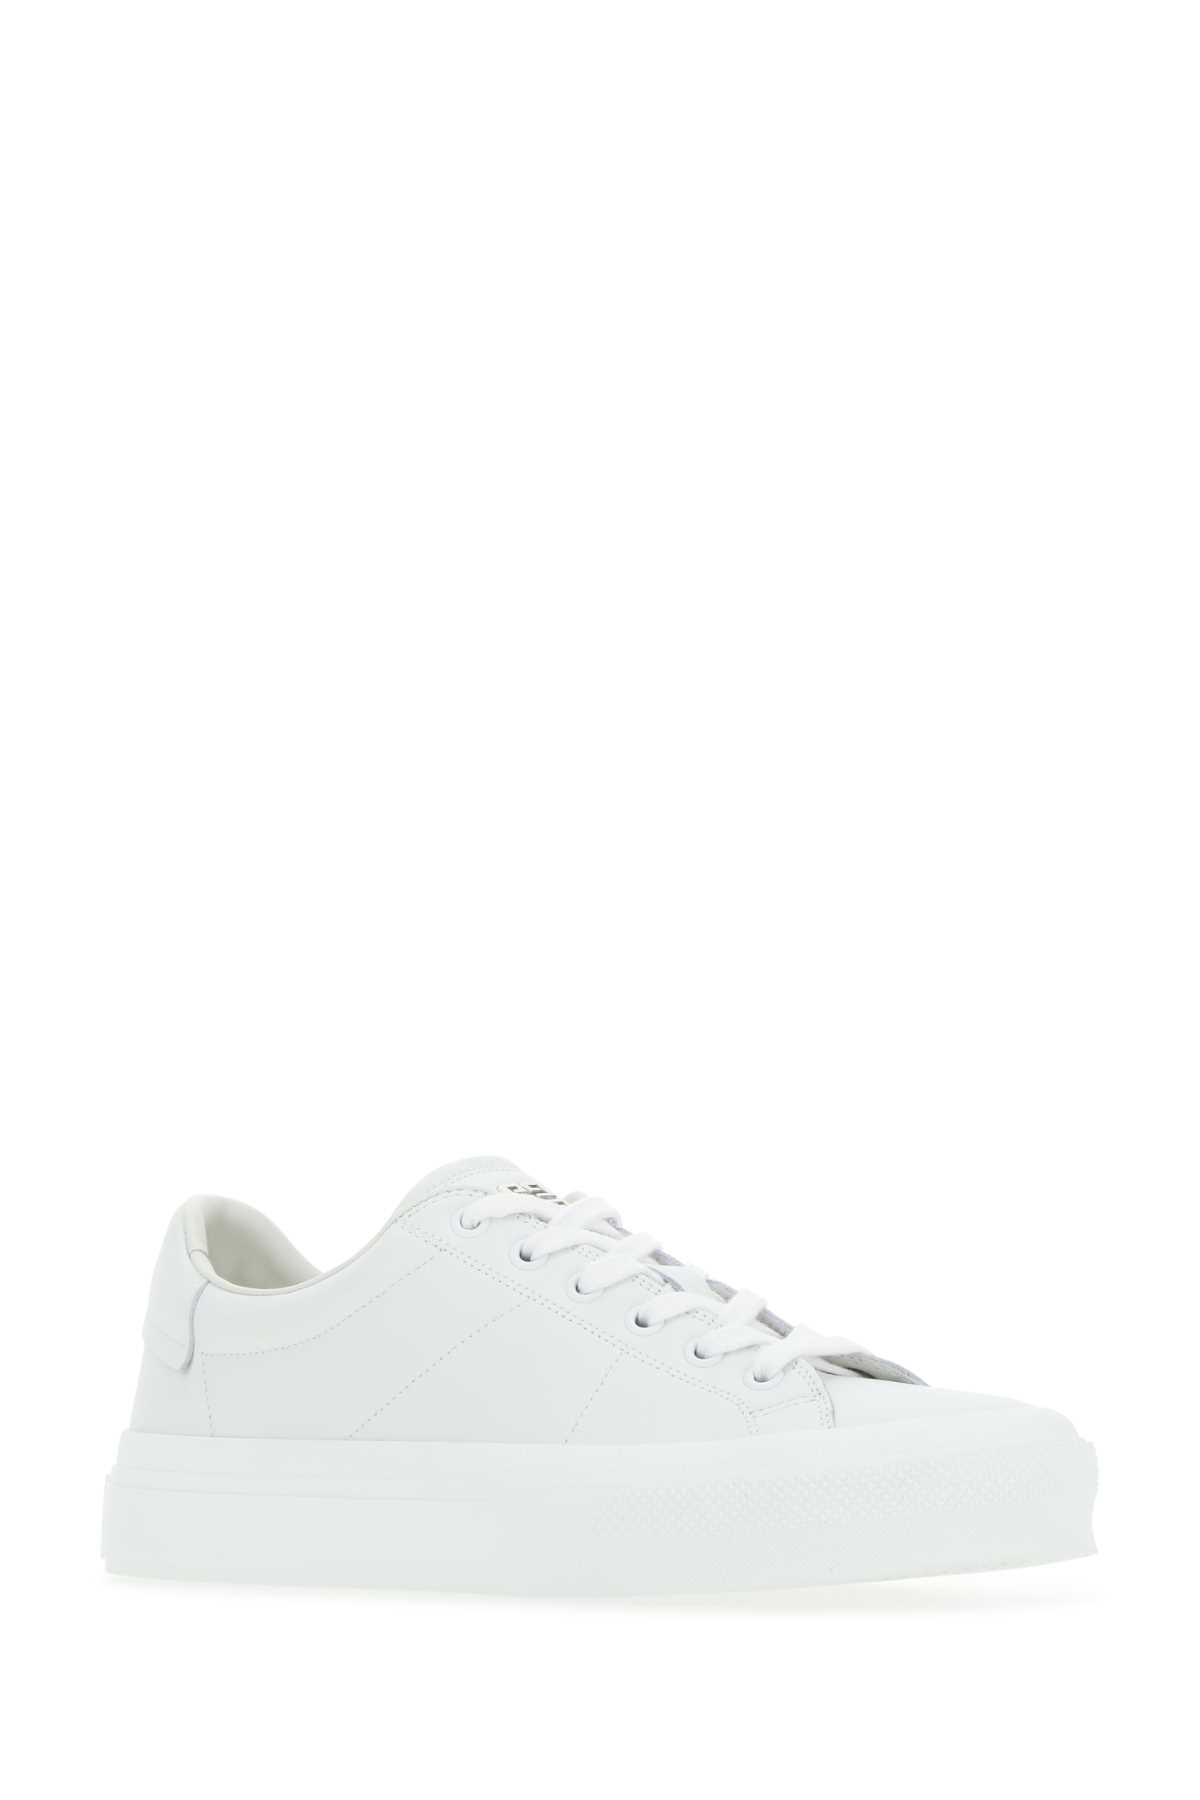 Givenchy White Leather City Light Sneakers In 100